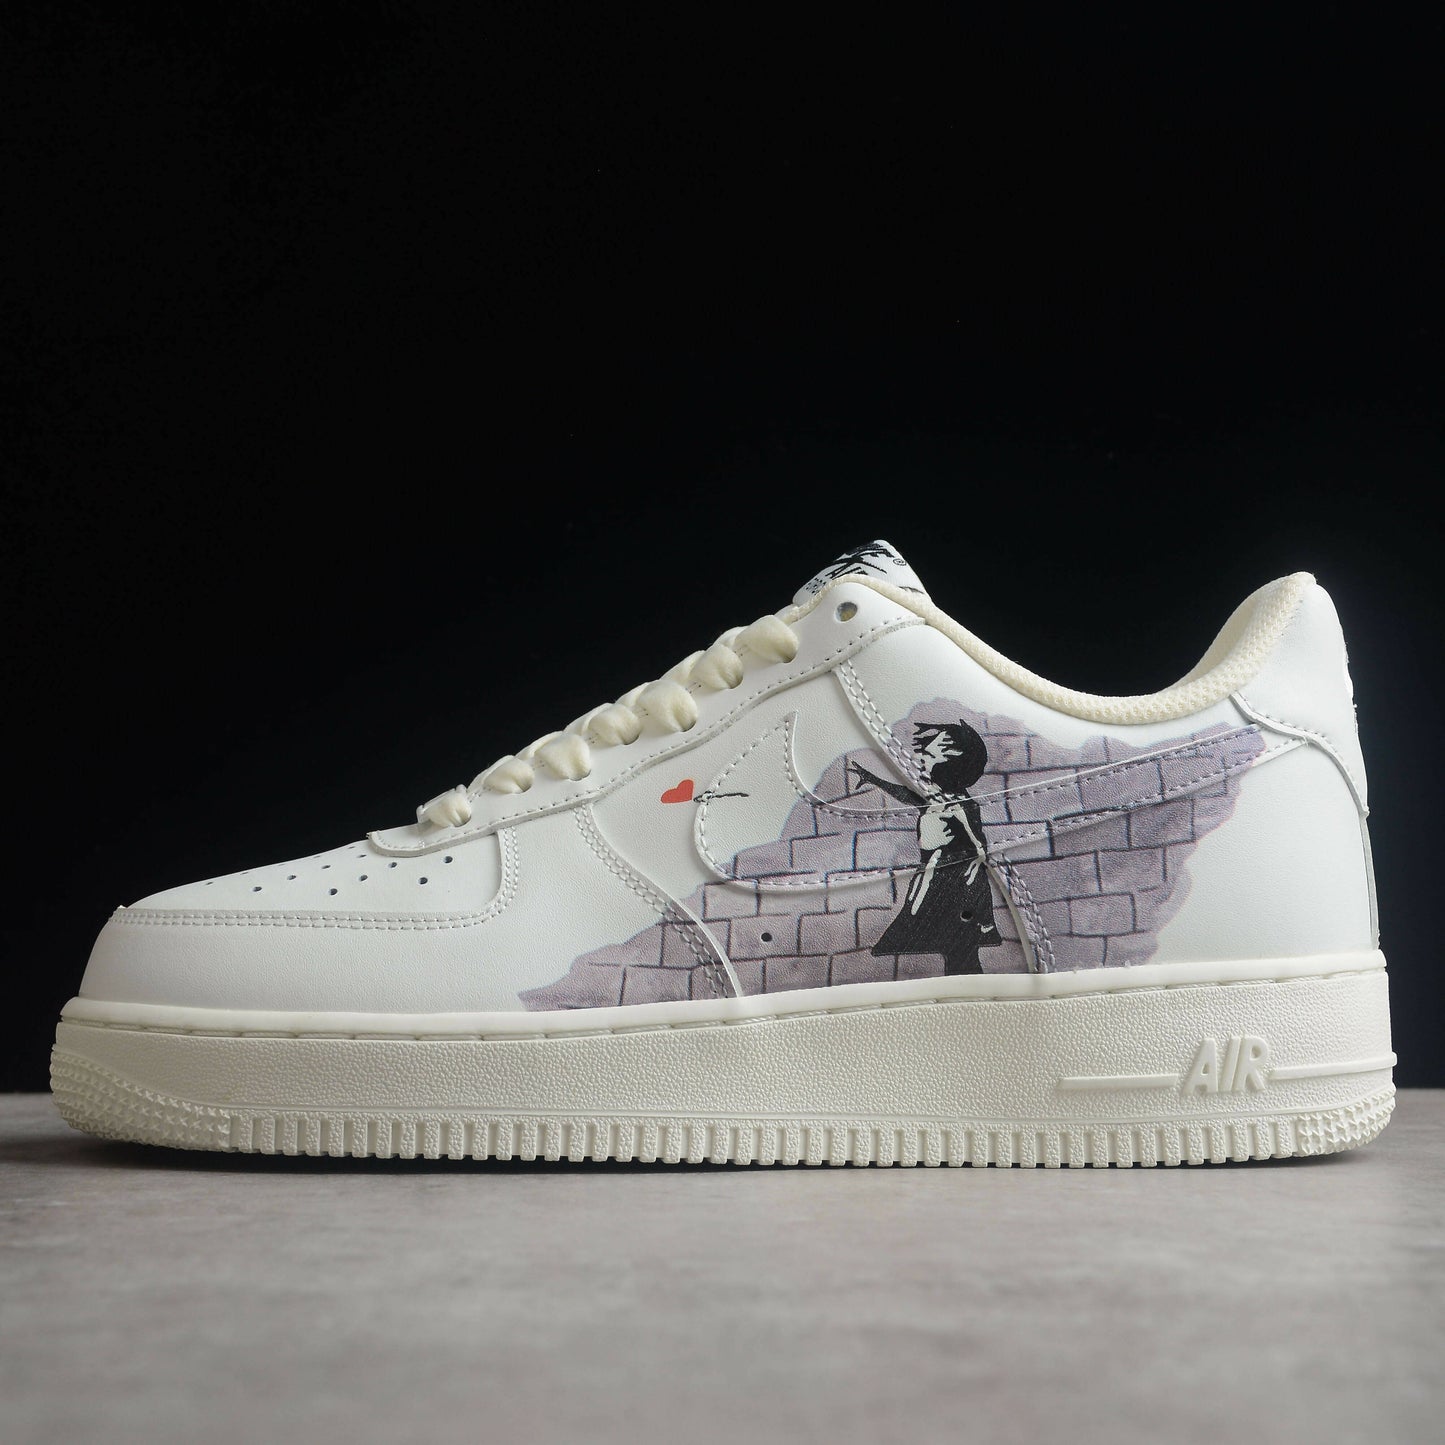 "Balloon Girl" by Banksy x Air Force 1